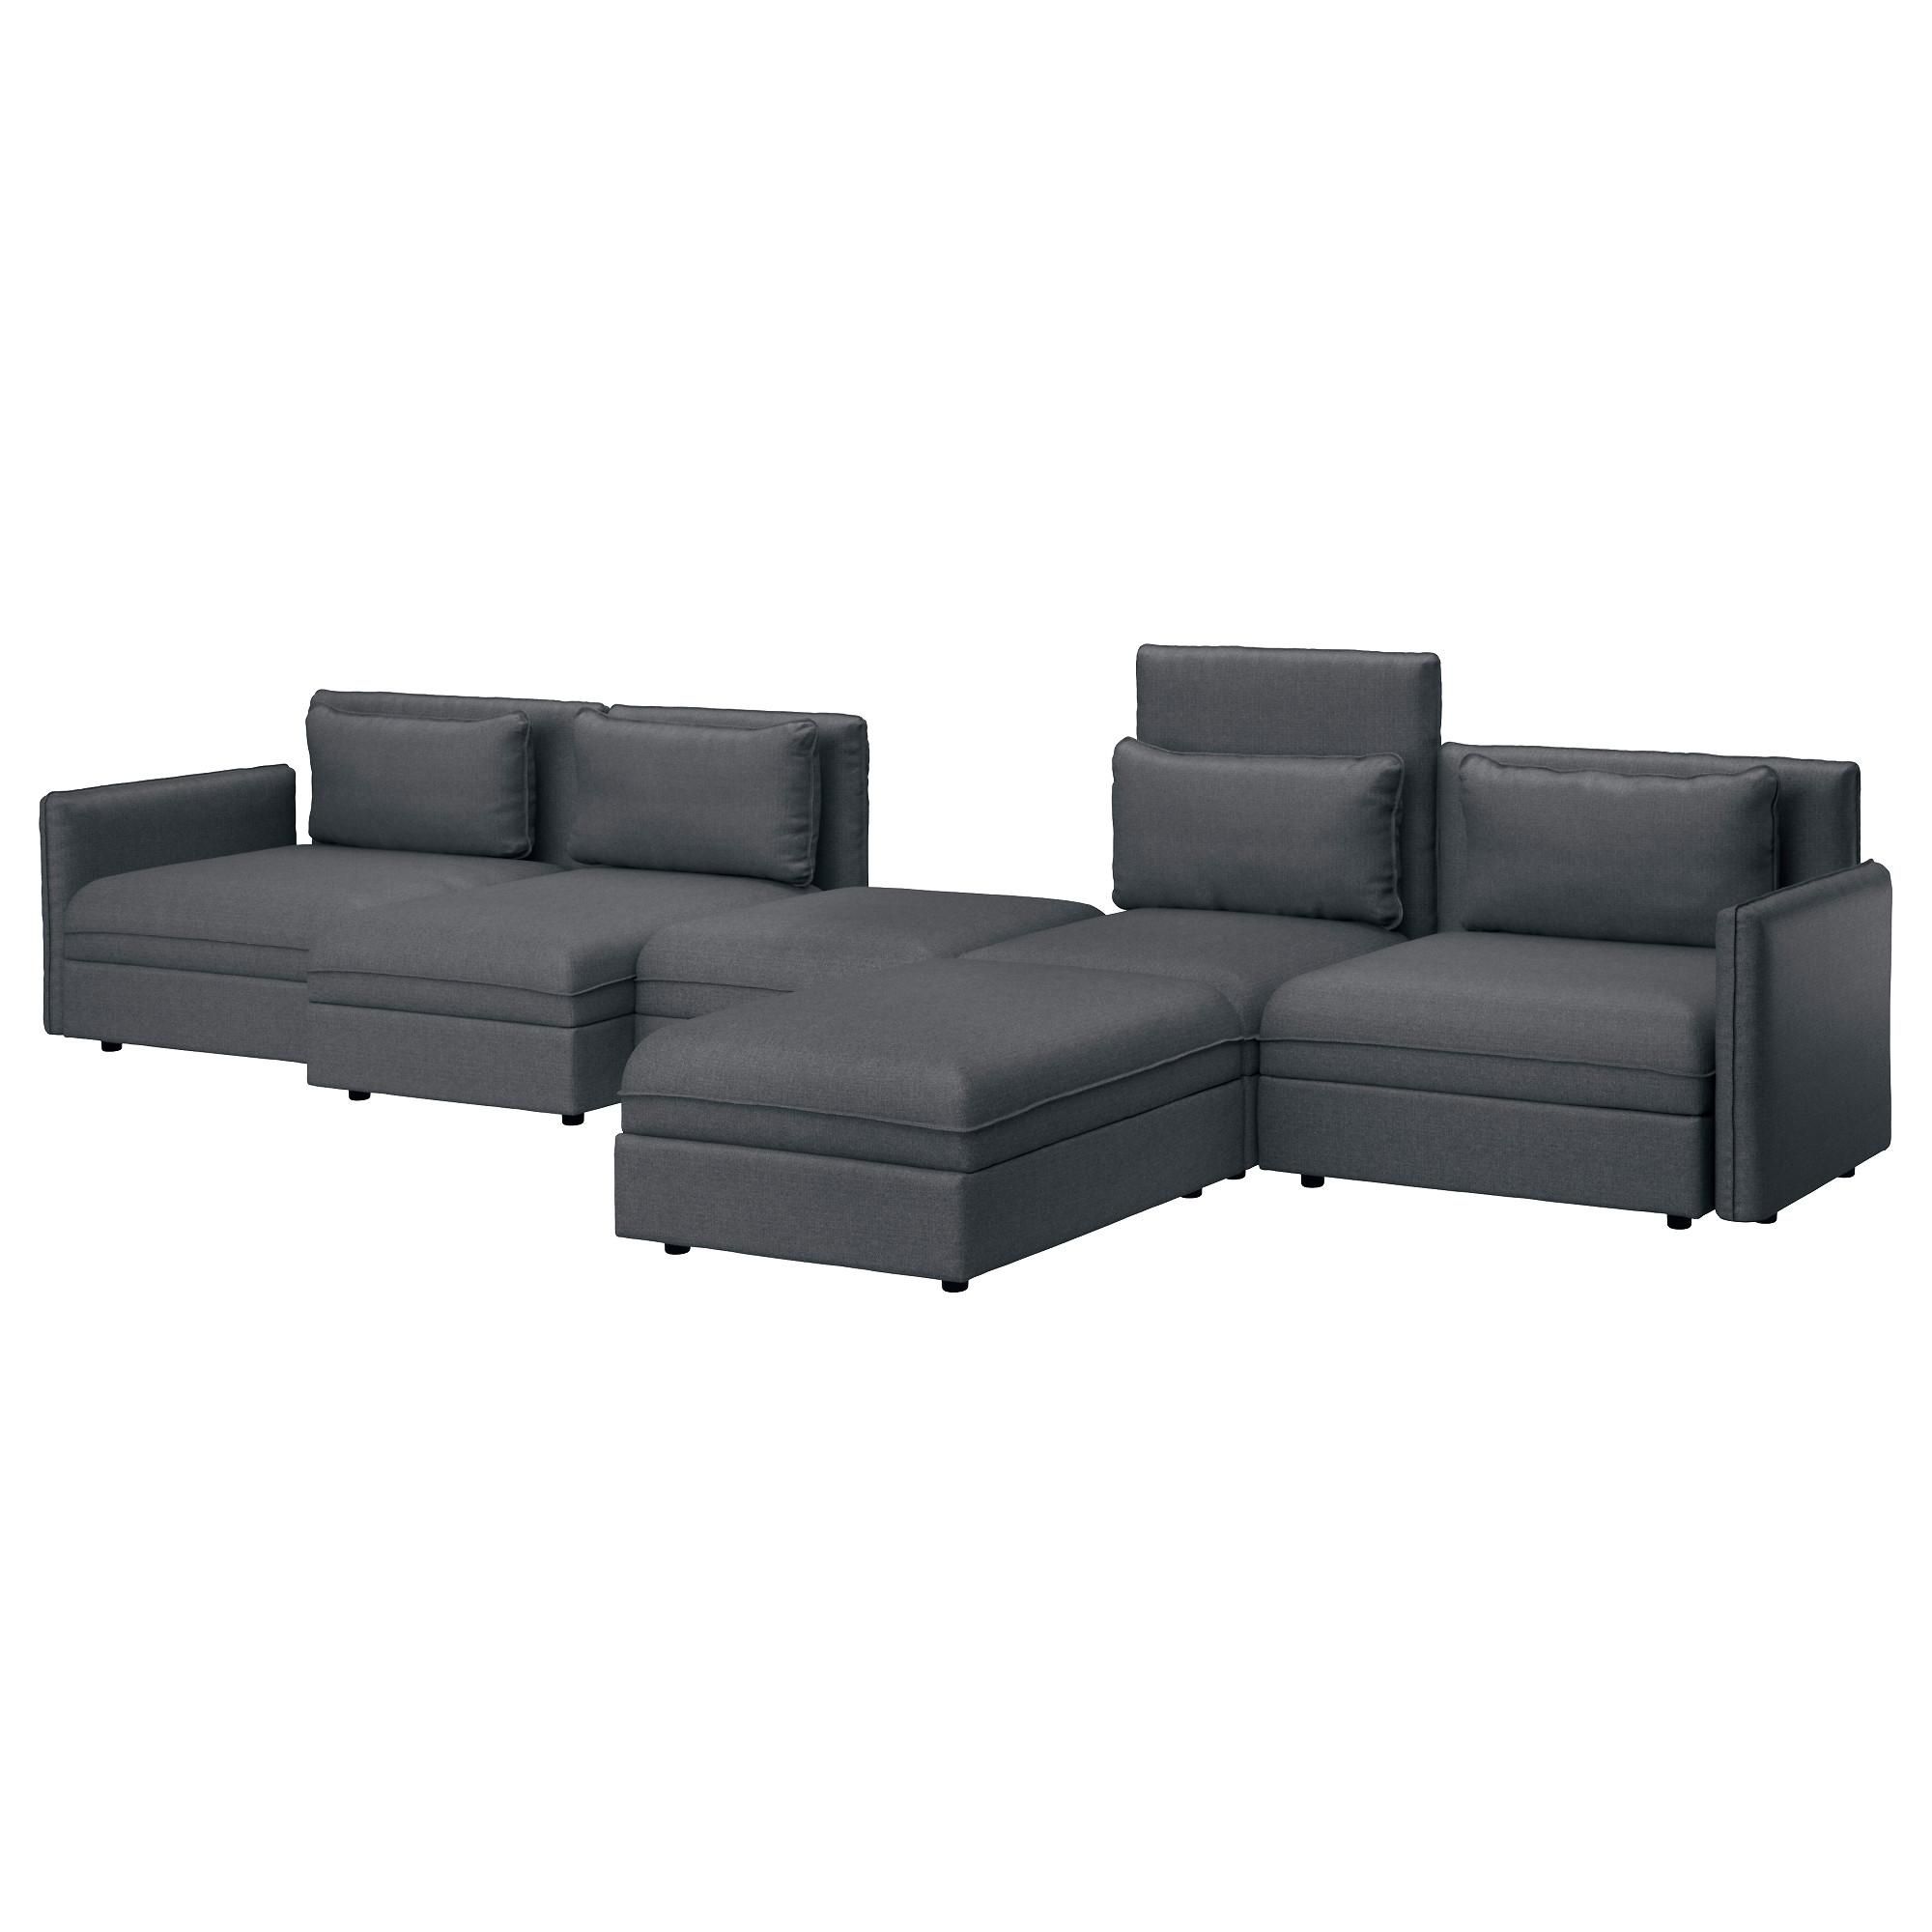 Sectional Sofas & Couches – Ikea With Leather Modular Sectional Sofas (View 12 of 20)